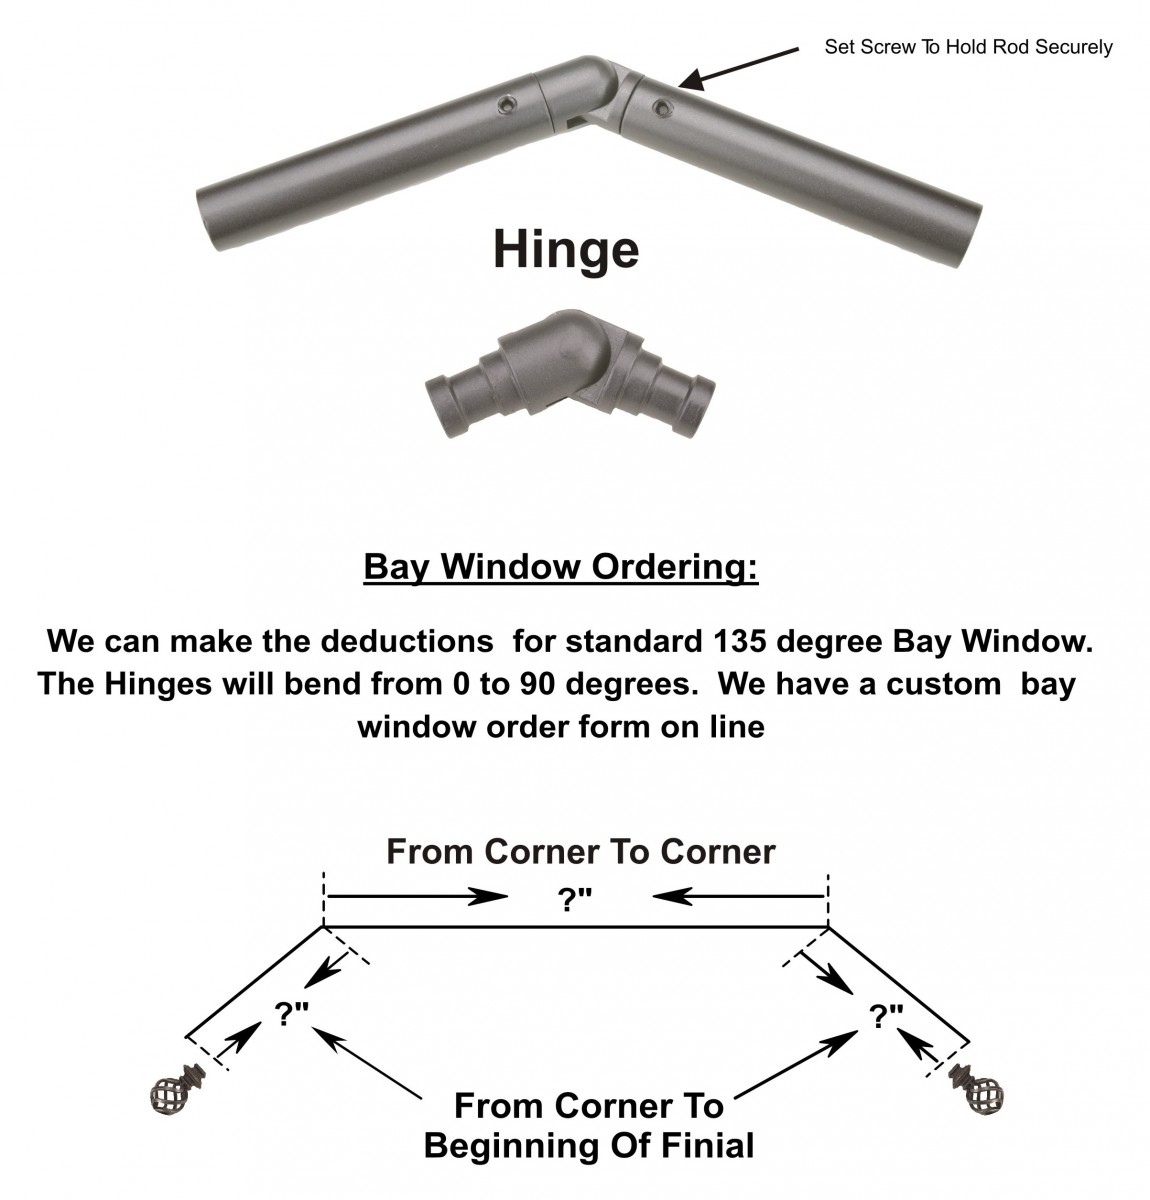 Hinges for 1/2" 3/4" 1 1/4" & 2" Rods